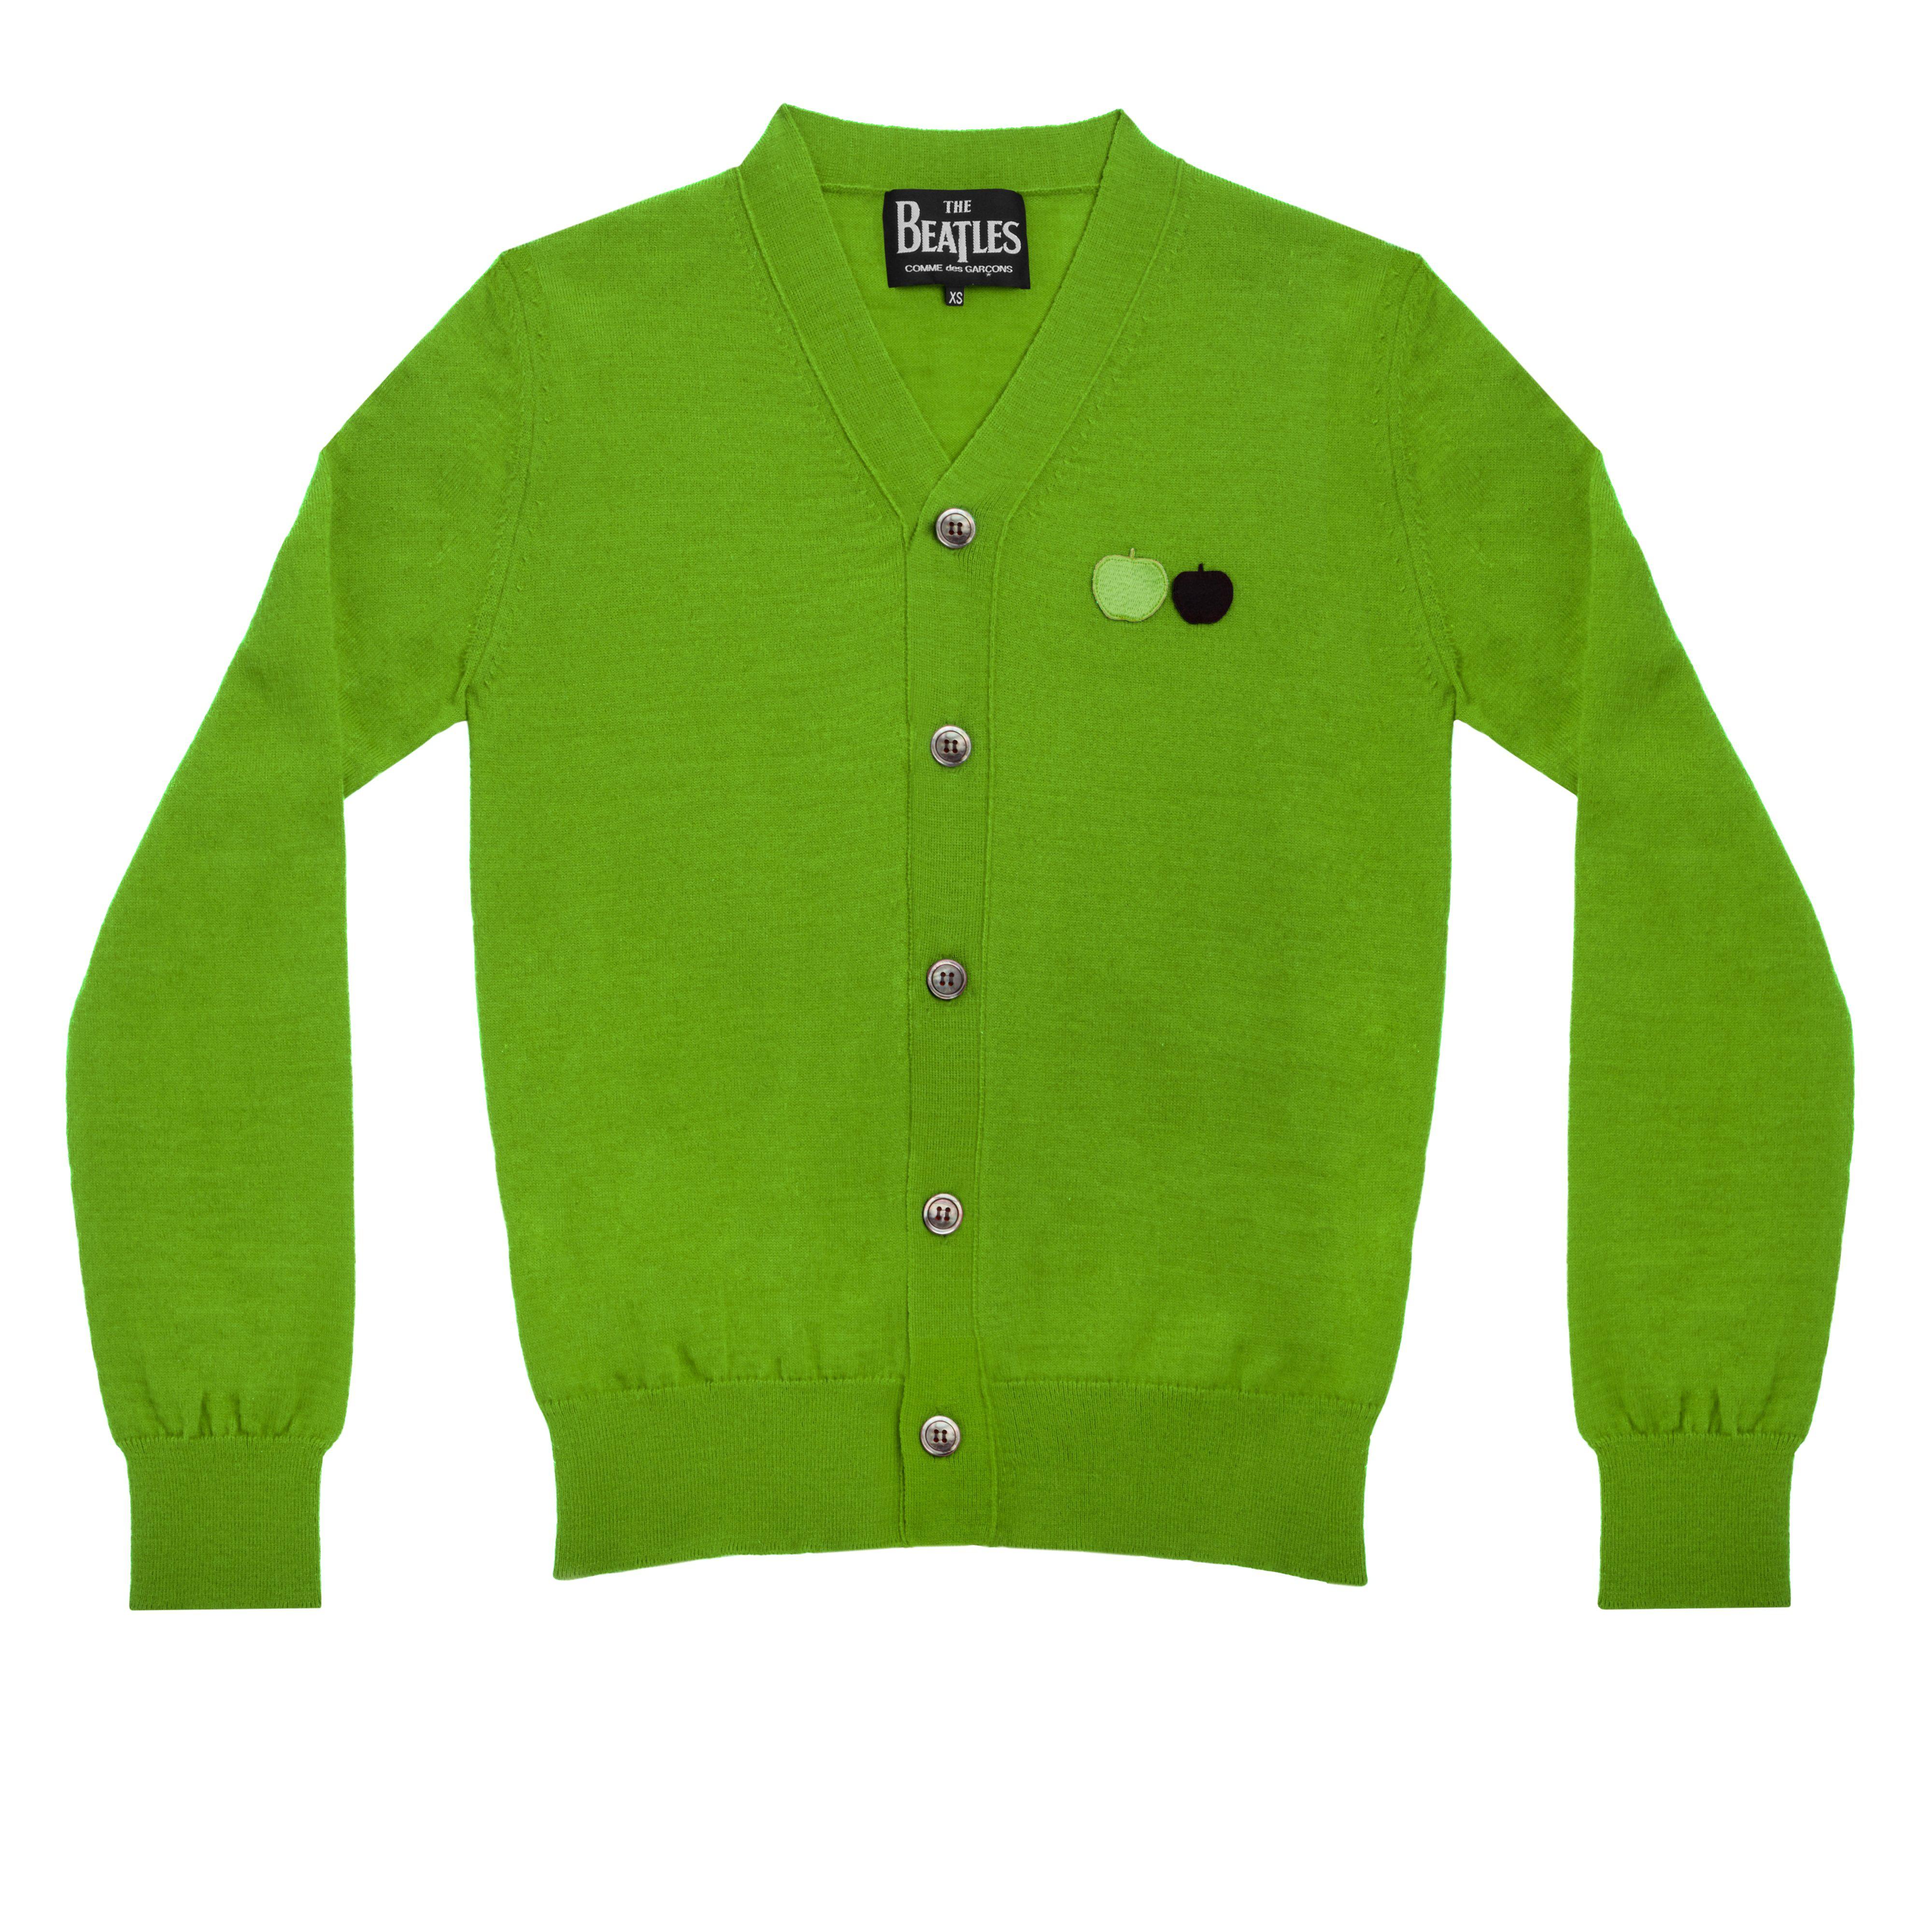 CDG x The Beatles Unisex Cardgian (Green) by COMME DES GARCONS X BEATLES